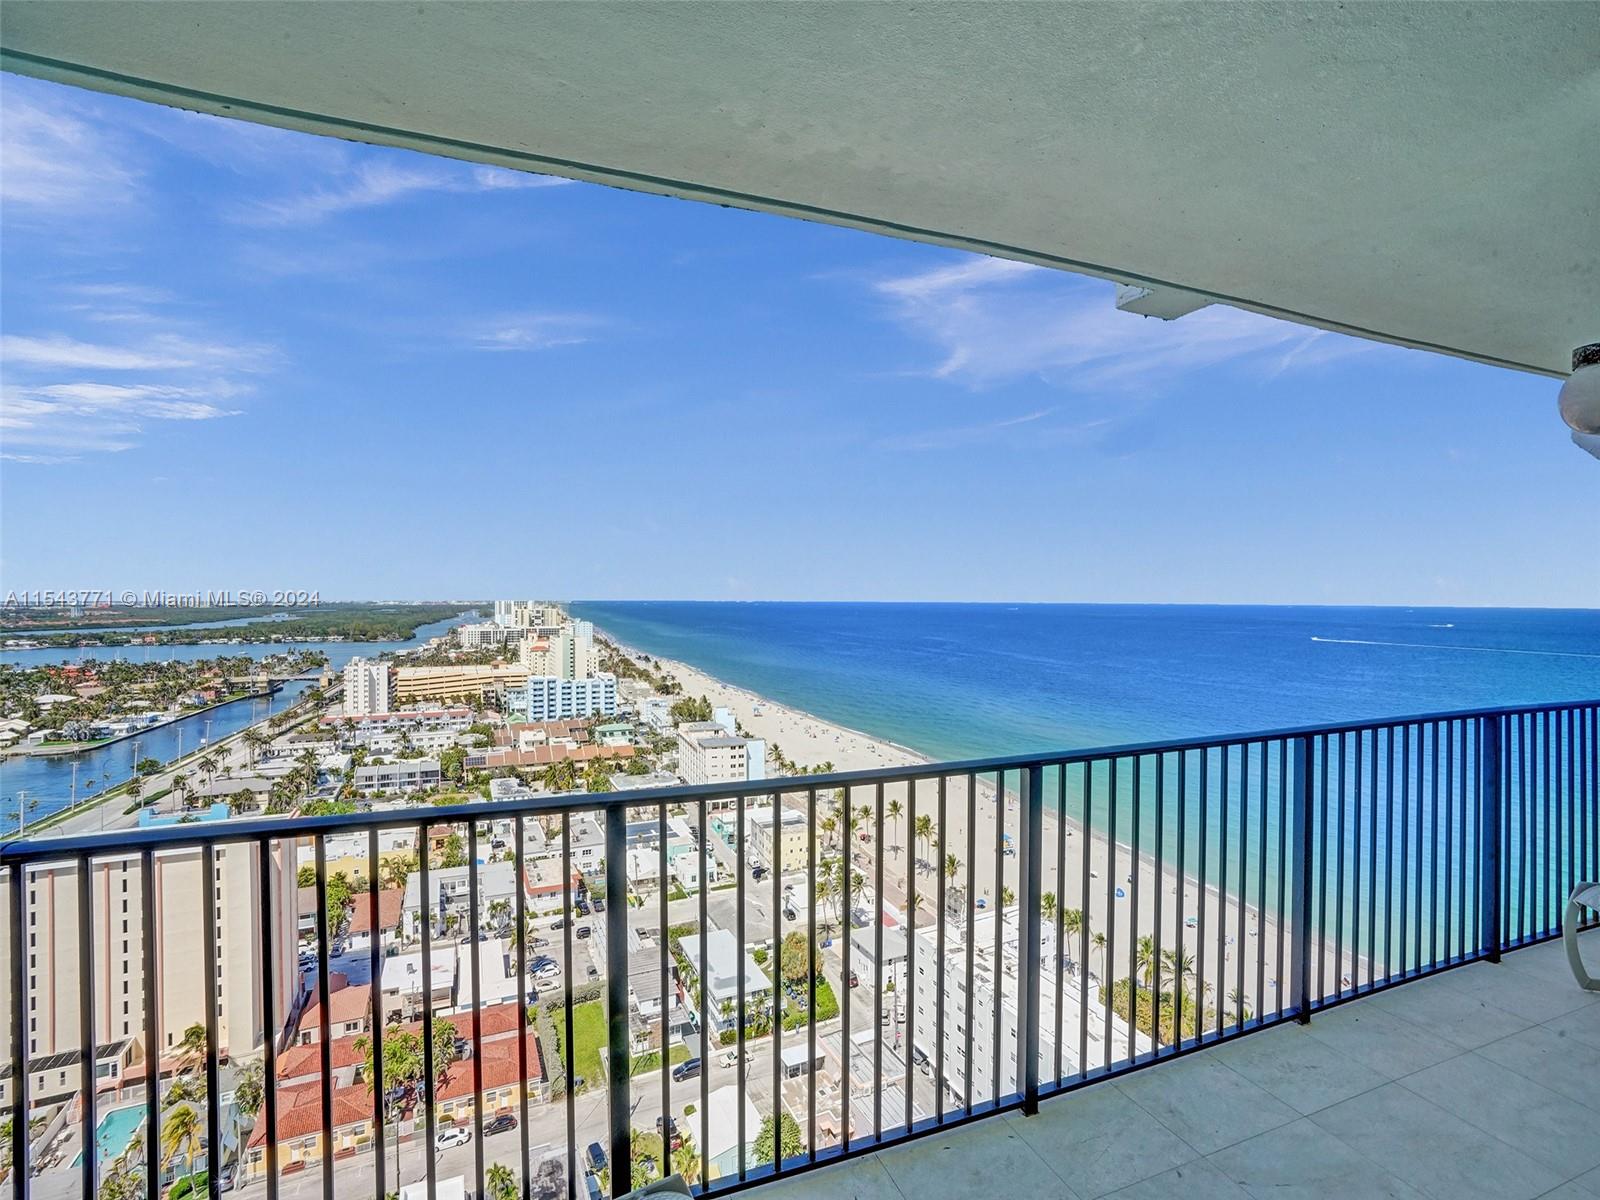 ON TOP OF THE WORLD. PANORAMIC VIEWS FROM THE 25TH FLOOR. WALK INTO THIS NE CORNER PENTHOUSE CONDO AND ENJOY UNOBSTRUCTED VIEWS TO FT LAUDERDALE SKYLINE, THE INTRACOASTAL AND ENDLESS OCEAN WAVES. 2,000 SF 3 BEDROOMS AND 2.5 BATHS FEATURING EXPANSIVE LIVING AREA. PRIMARY SUITE W/ DRESSING AREA & WALK-IN CLOSET, LUXURIOUS  BATH W/ SEPARATE TUB & SHOWER. THE RENOVATED KITCHEN HAS DIRECT OCEAN VIEWS THAT CAN ALSO BE ENJOYED FROM THE LIVING AND DINING ROOMS. IMPACT SLIDING DOORS & WINDOWS & WASHER/DRYER IN UNIT.  LOCATED JUST STEPS FROM THE HOLLYWOOD BROADWALK IN A COUNTRY CLUB SETTING WITH 24 HR SECURITY, GARAGE PARKING, 2 HEATED POOLS, BEACH SERVICE, 2 TENNIS COURTS, PICKLEBALL, & MORE. RESTAURANT ON THE POOL DECK, AND SOCIAL ACTIVITIES MONTHLY. FLL AIRPORT 10 MINUTES AWAY.